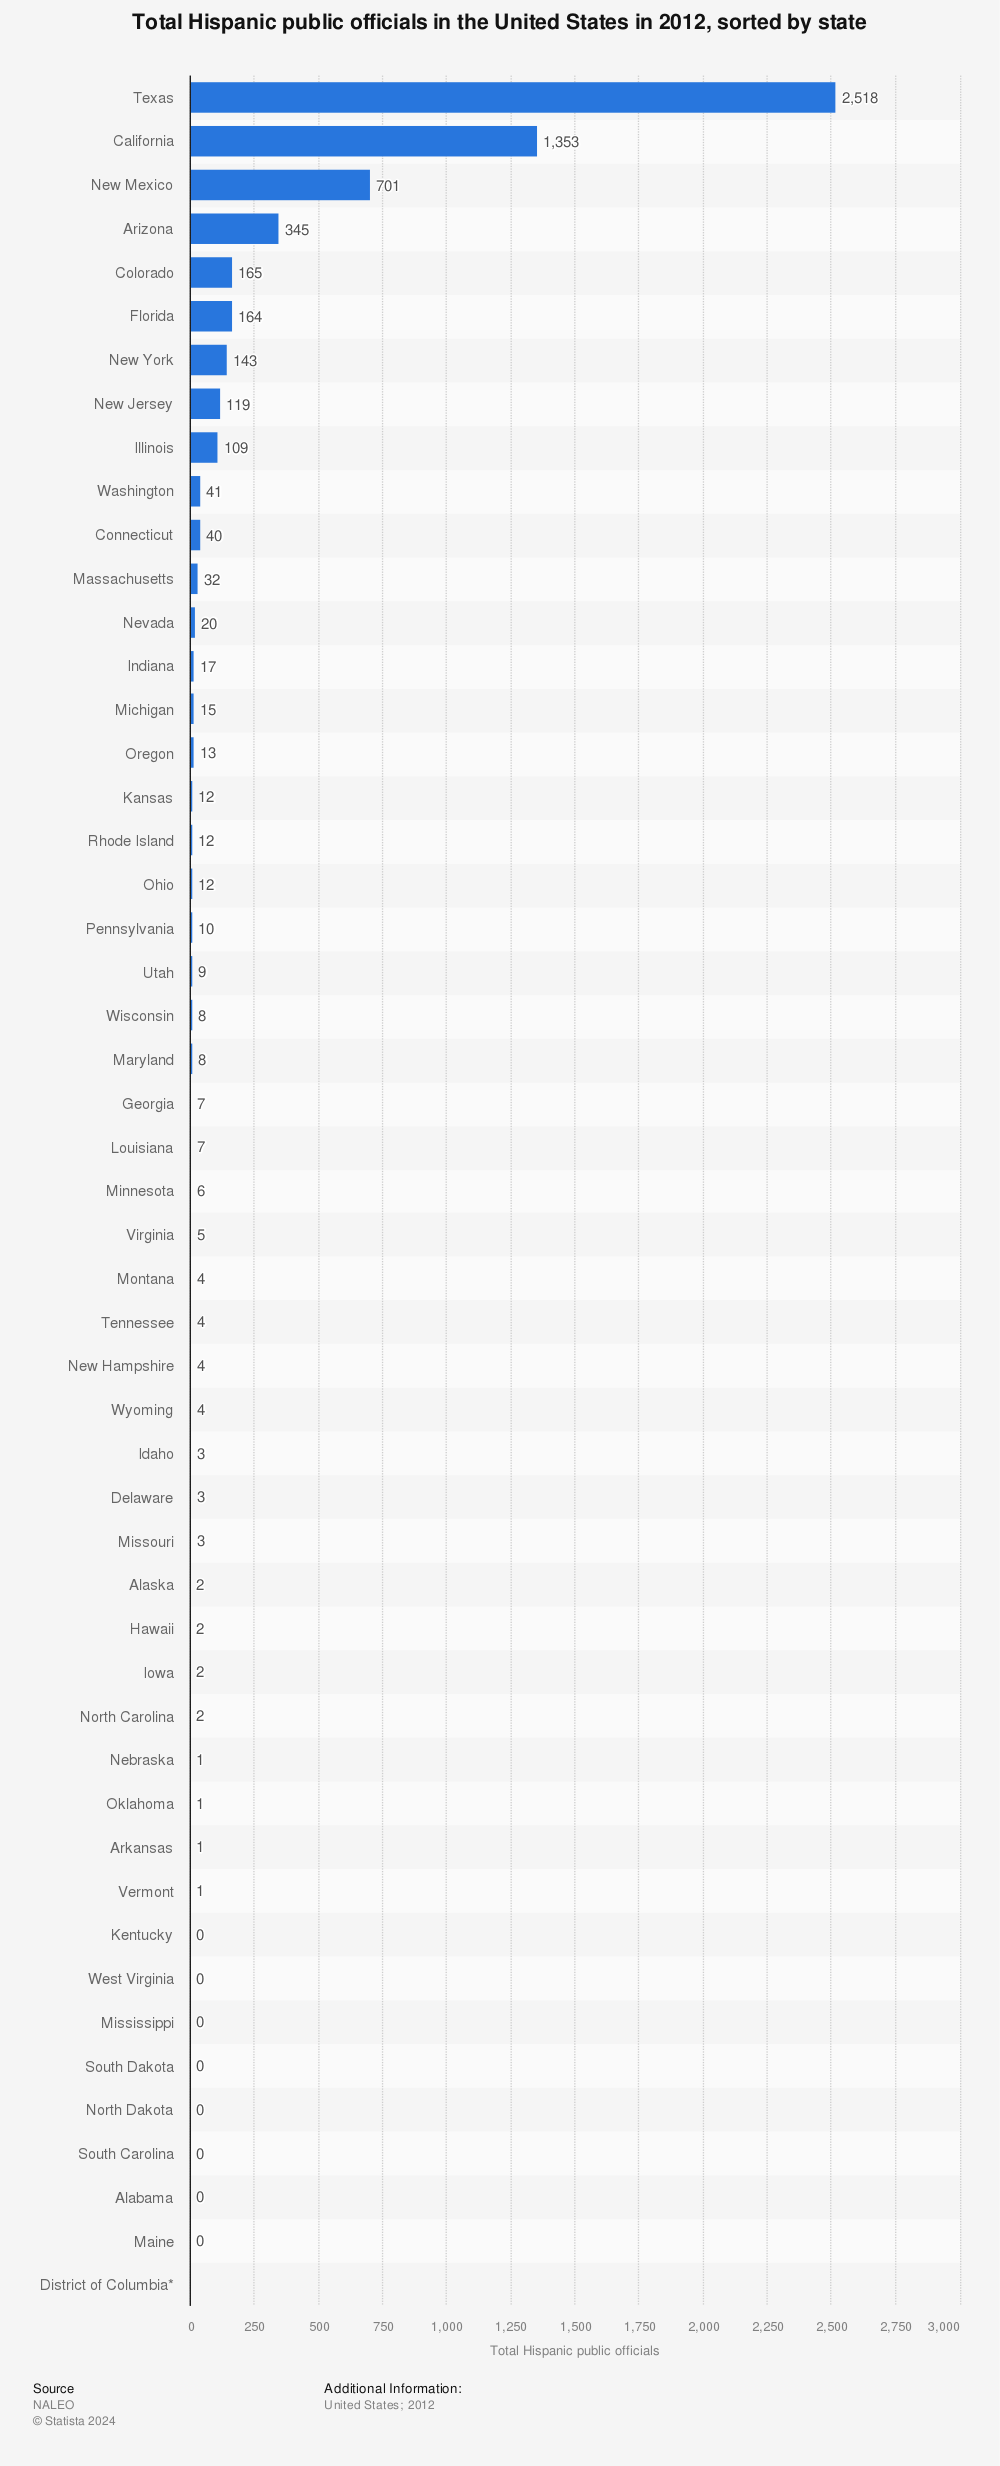 Statistic: Total Hispanic public officials in the United States in 2012, sorted by state  | Statista